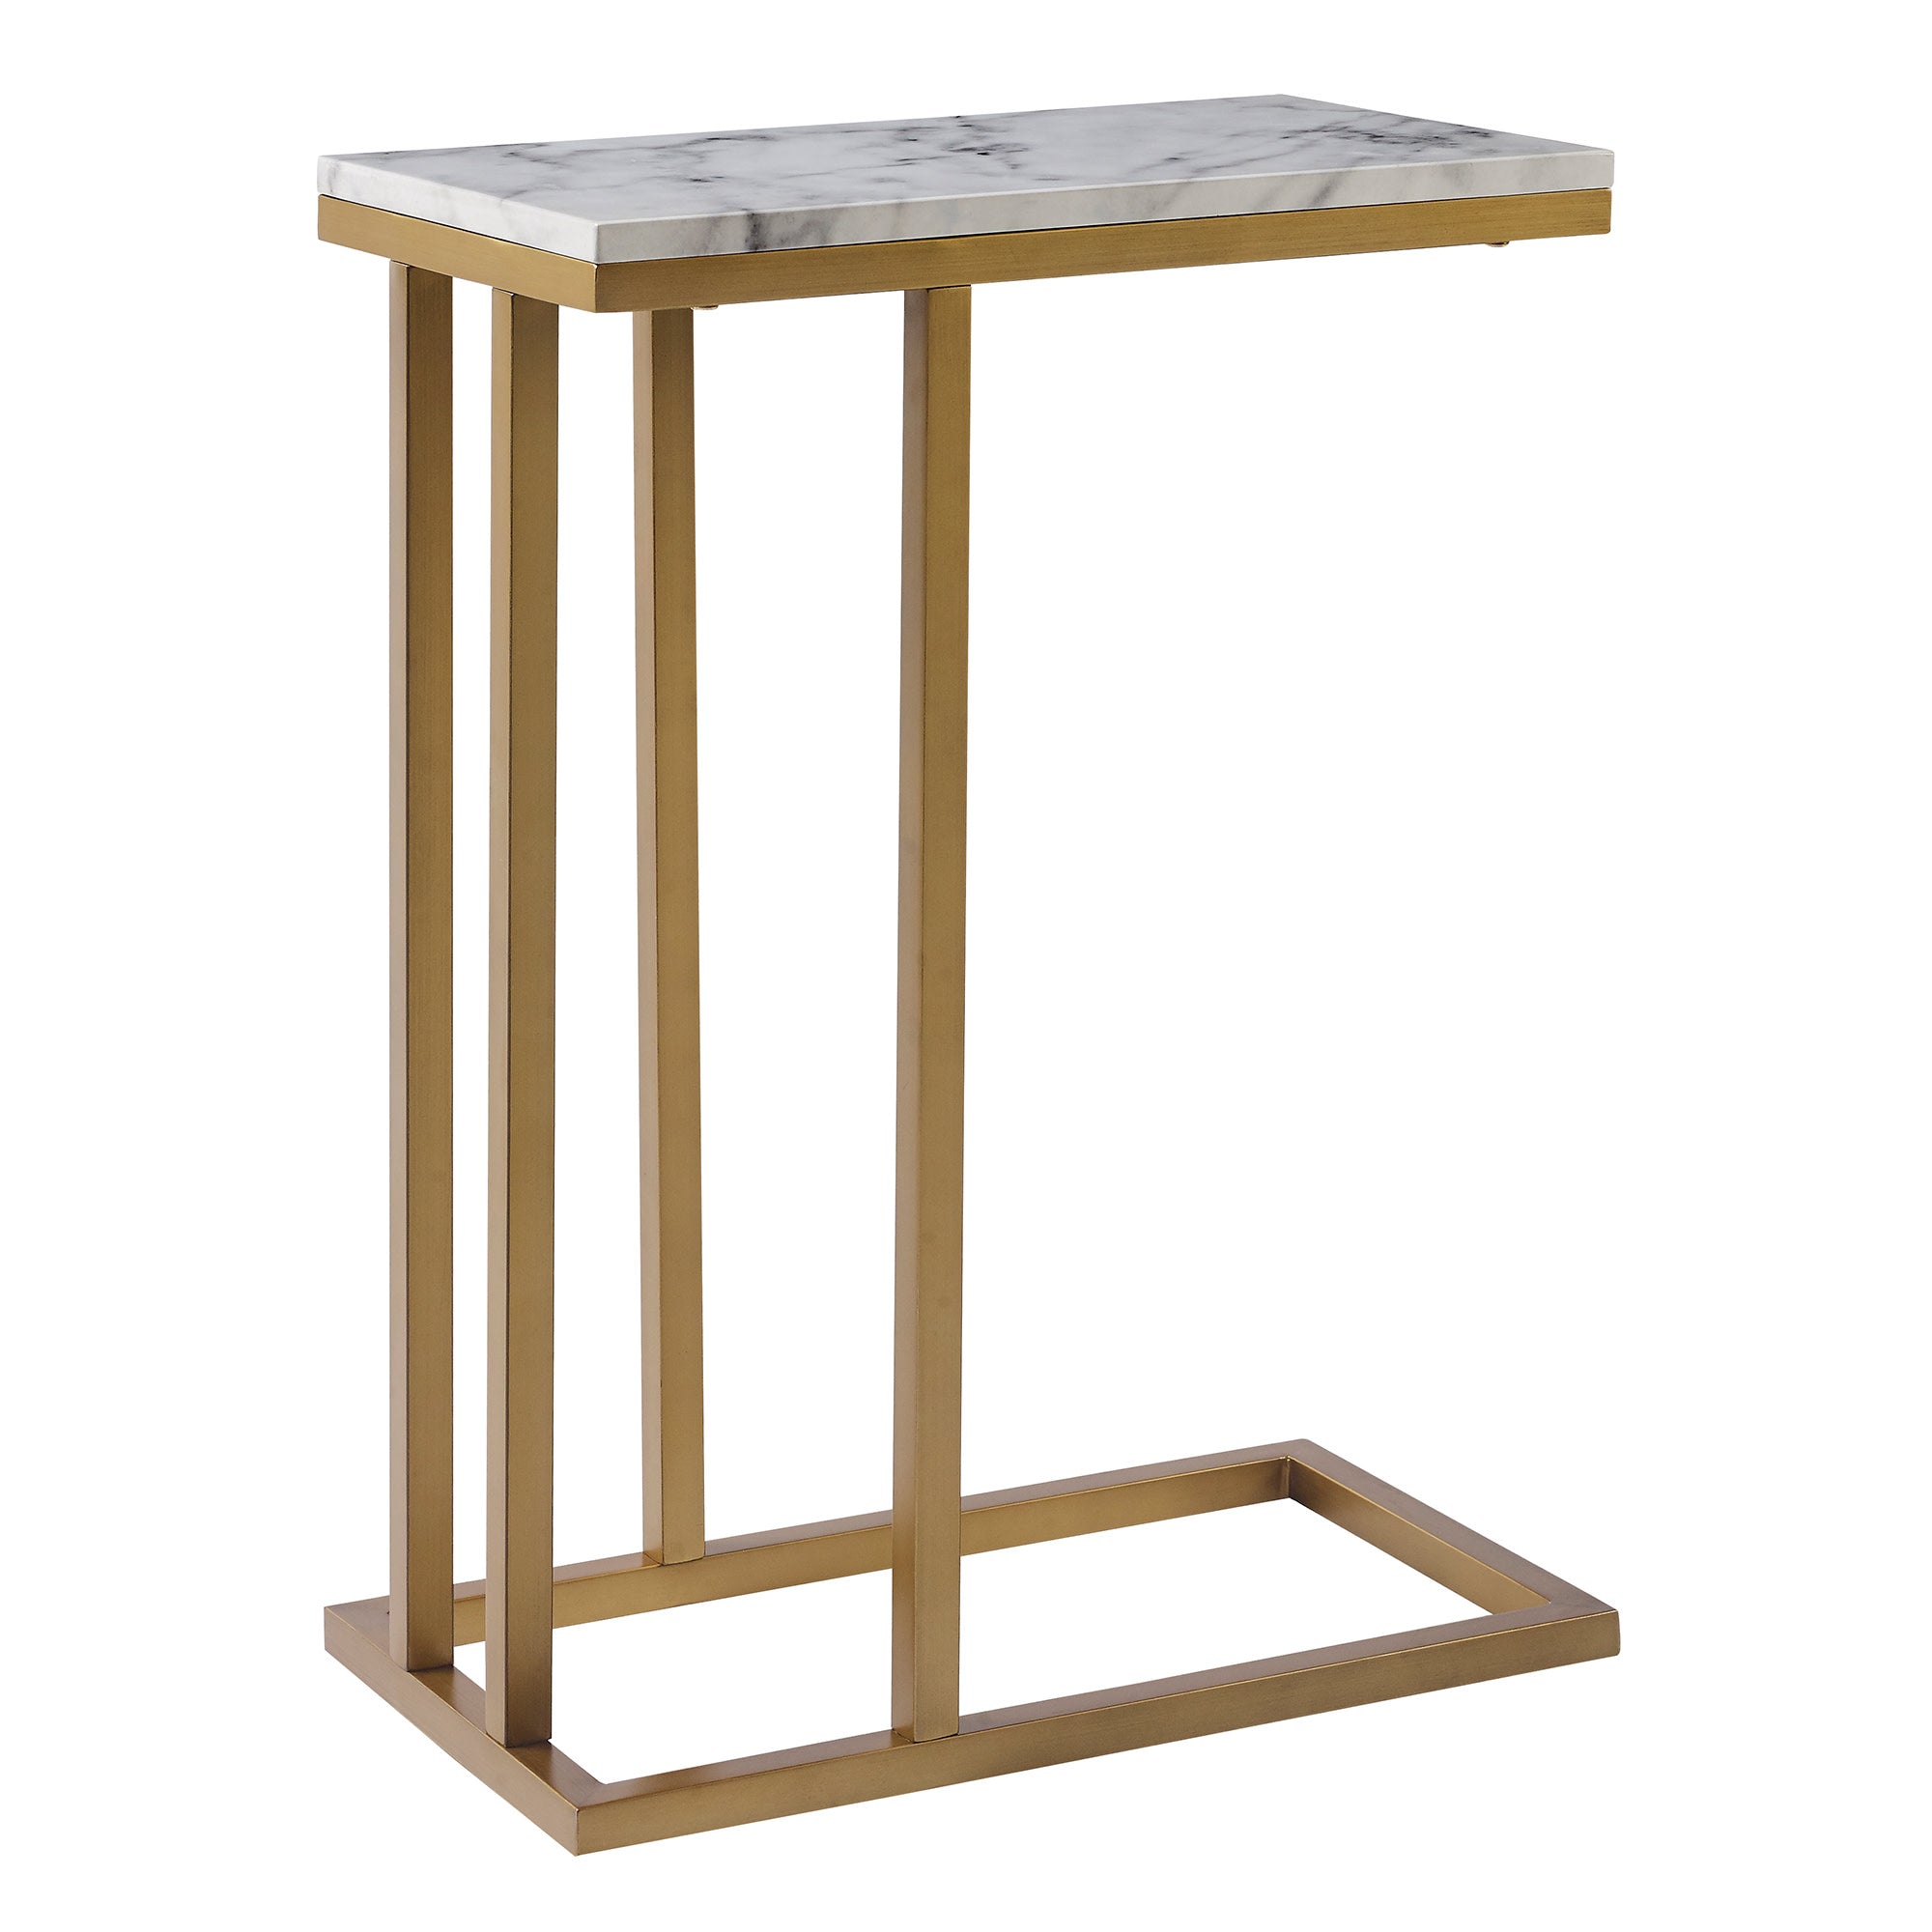 Teamson Home Marmo Modern Marble-Look C Shape Side Table, Marble/Brass